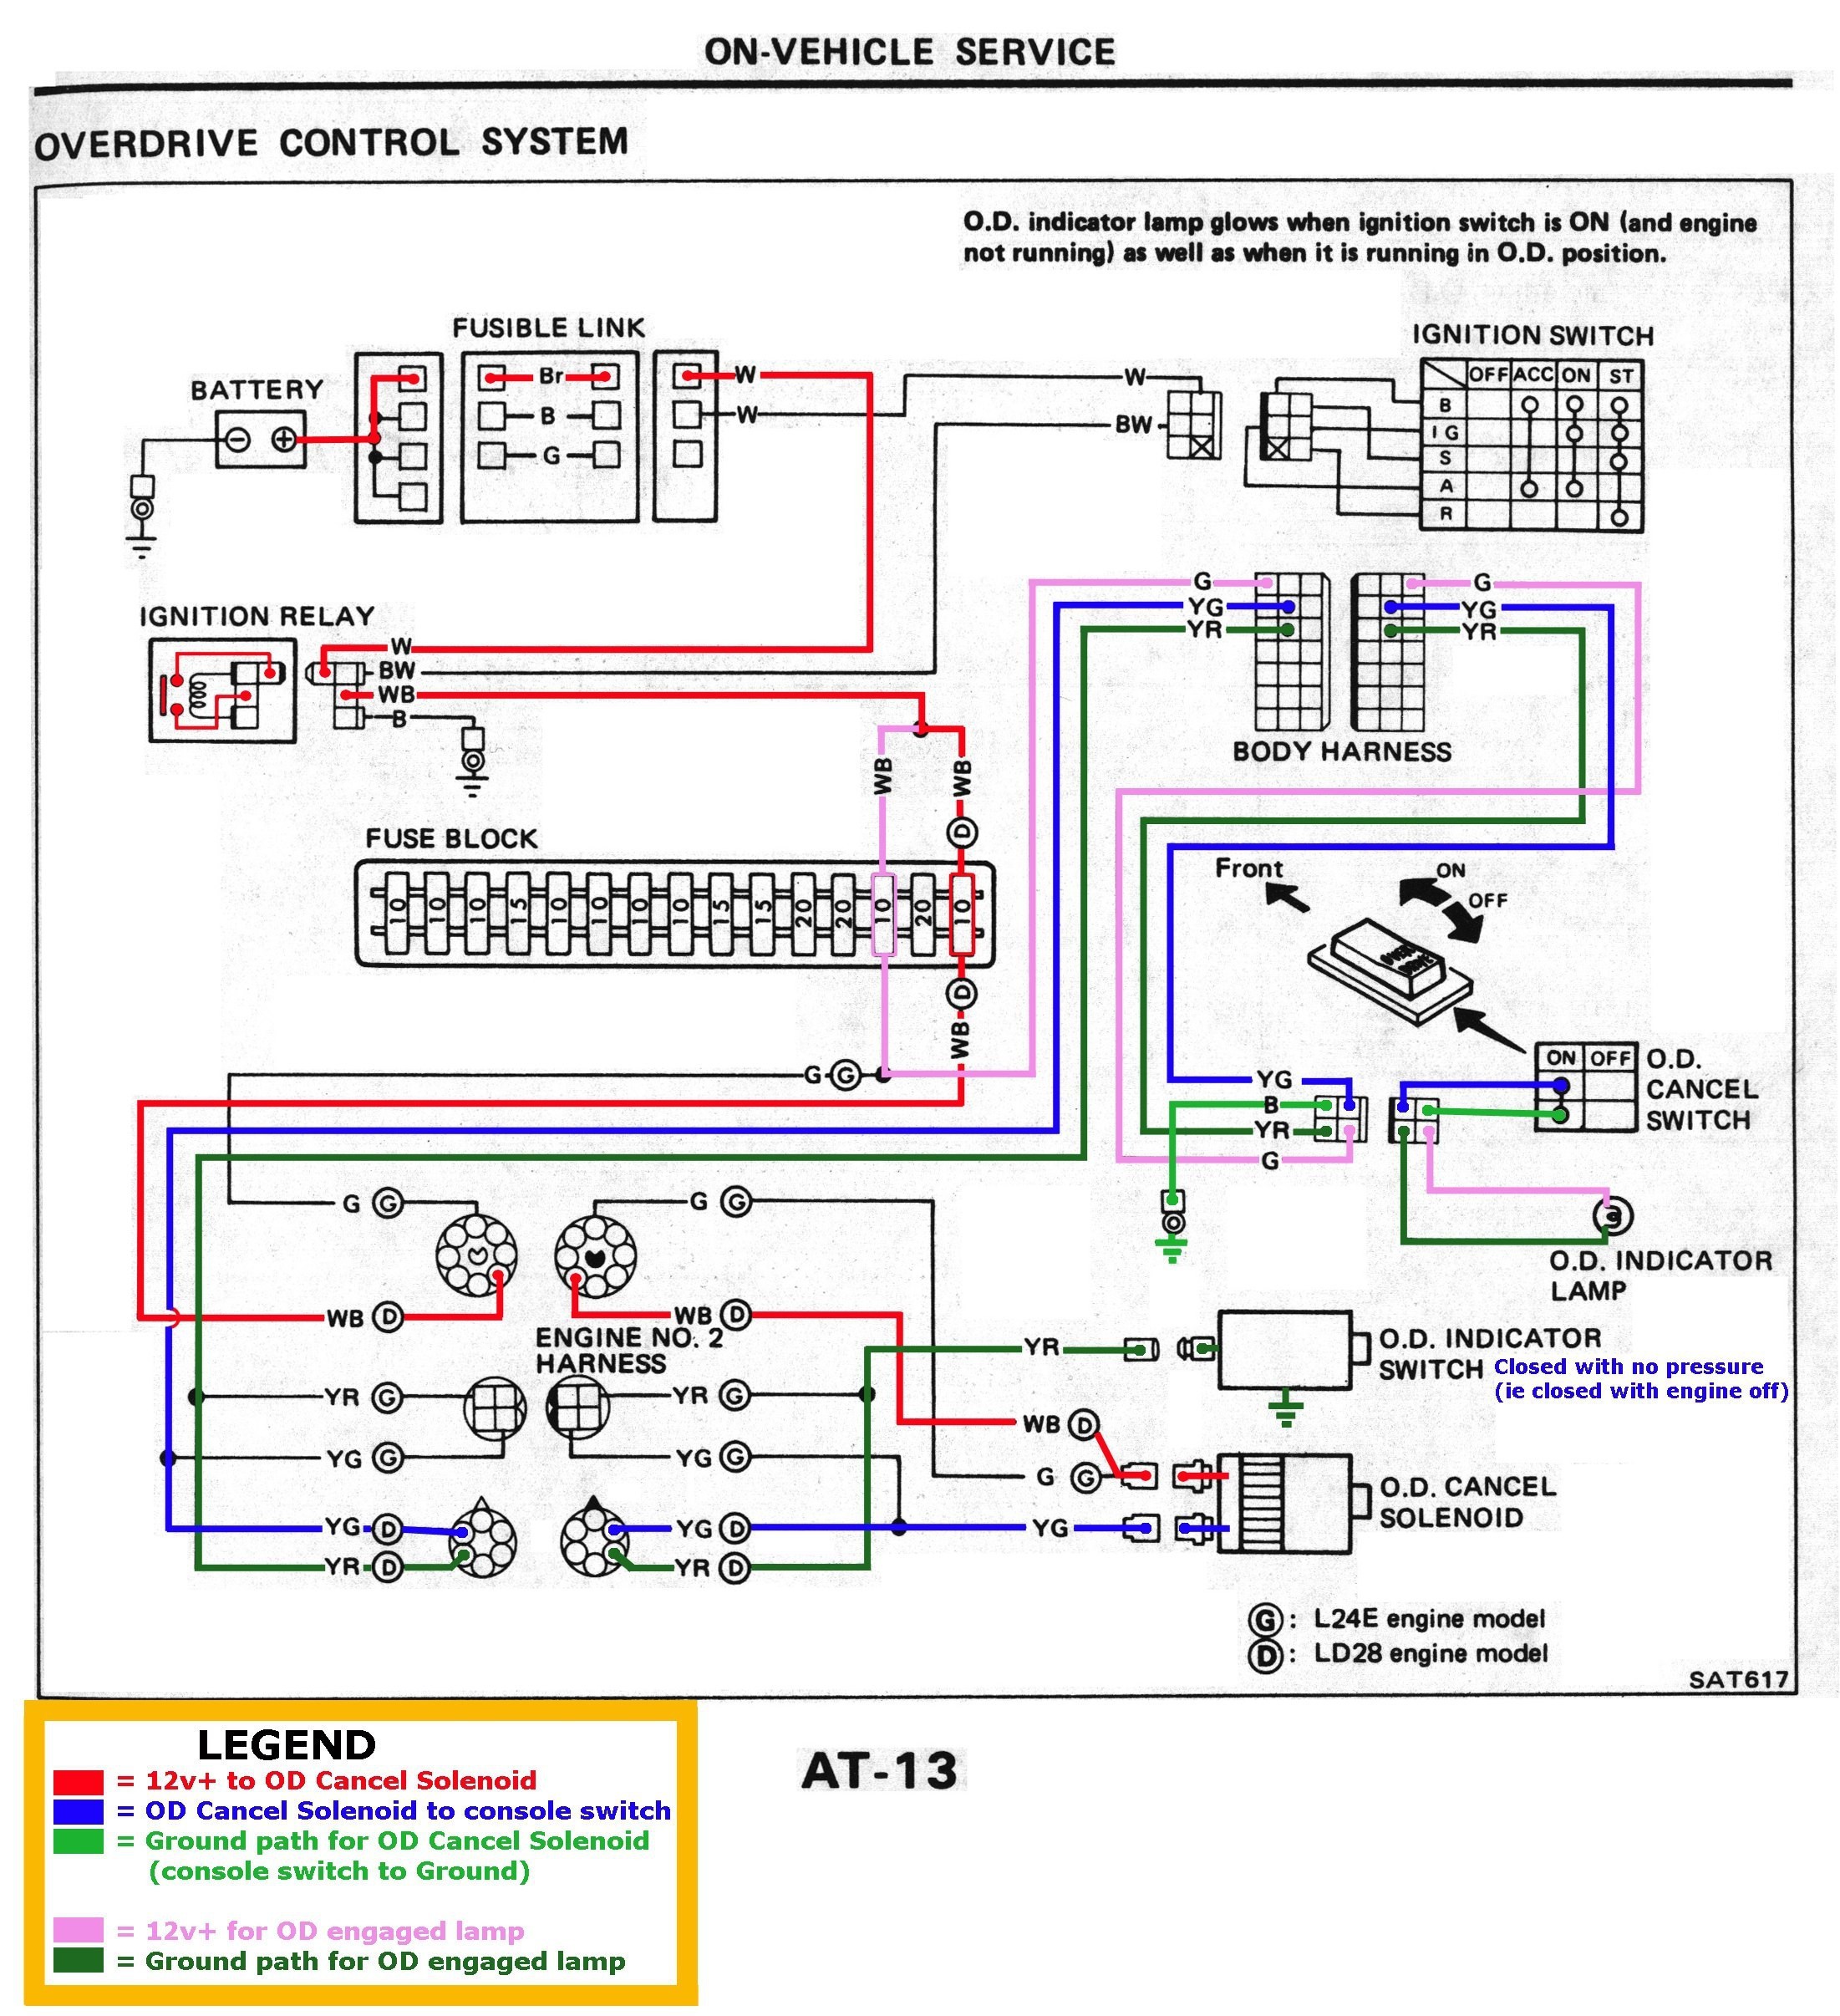 Wiring Diagram For Lights And Outlets Reference Wiring Diagram For Light Switch And Outlet New Wiring A Light Switch